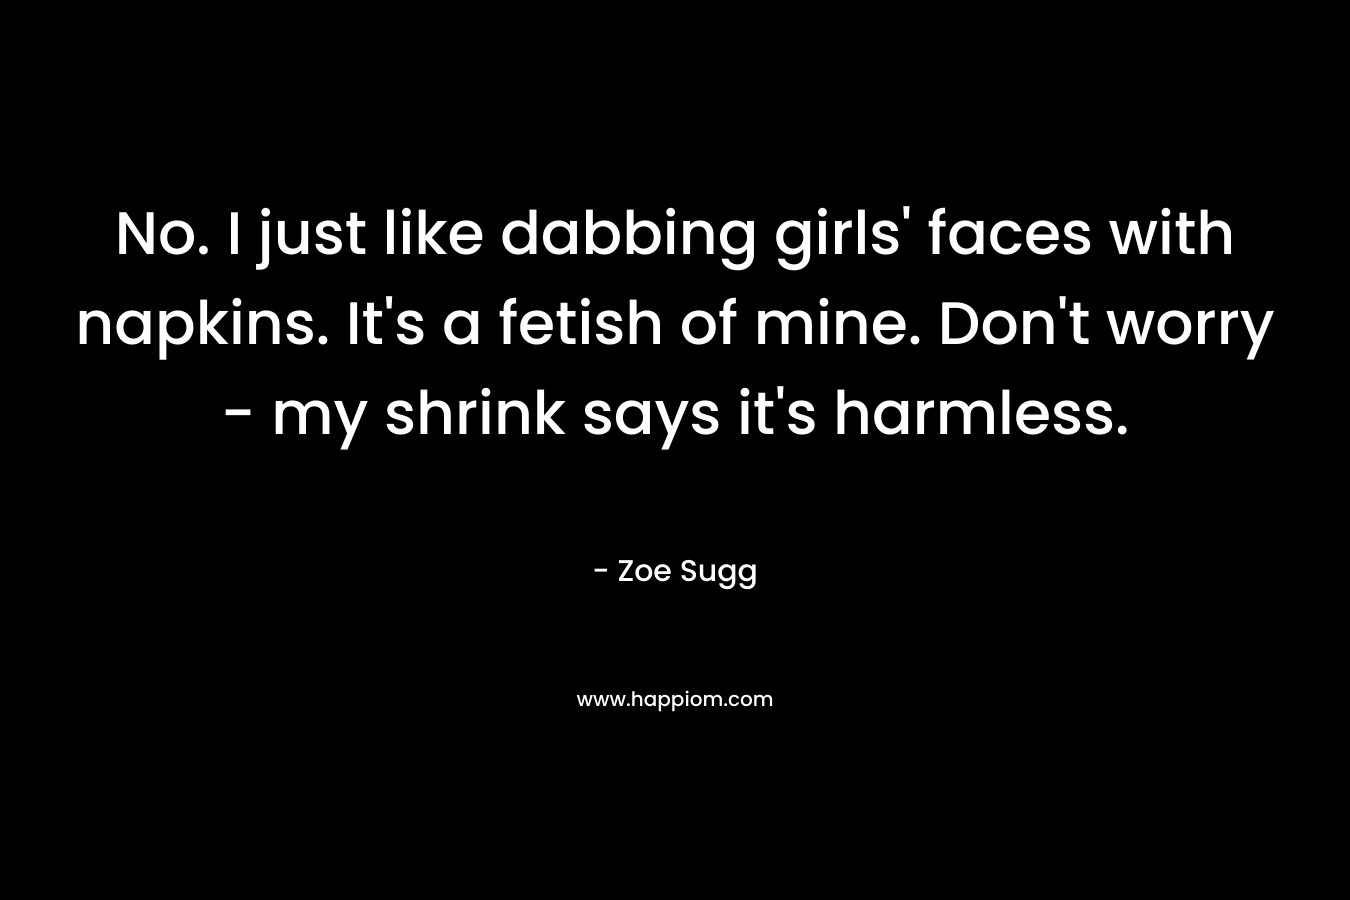 No. I just like dabbing girls’ faces with napkins. It’s a fetish of mine. Don’t worry – my shrink says it’s harmless. – Zoe Sugg